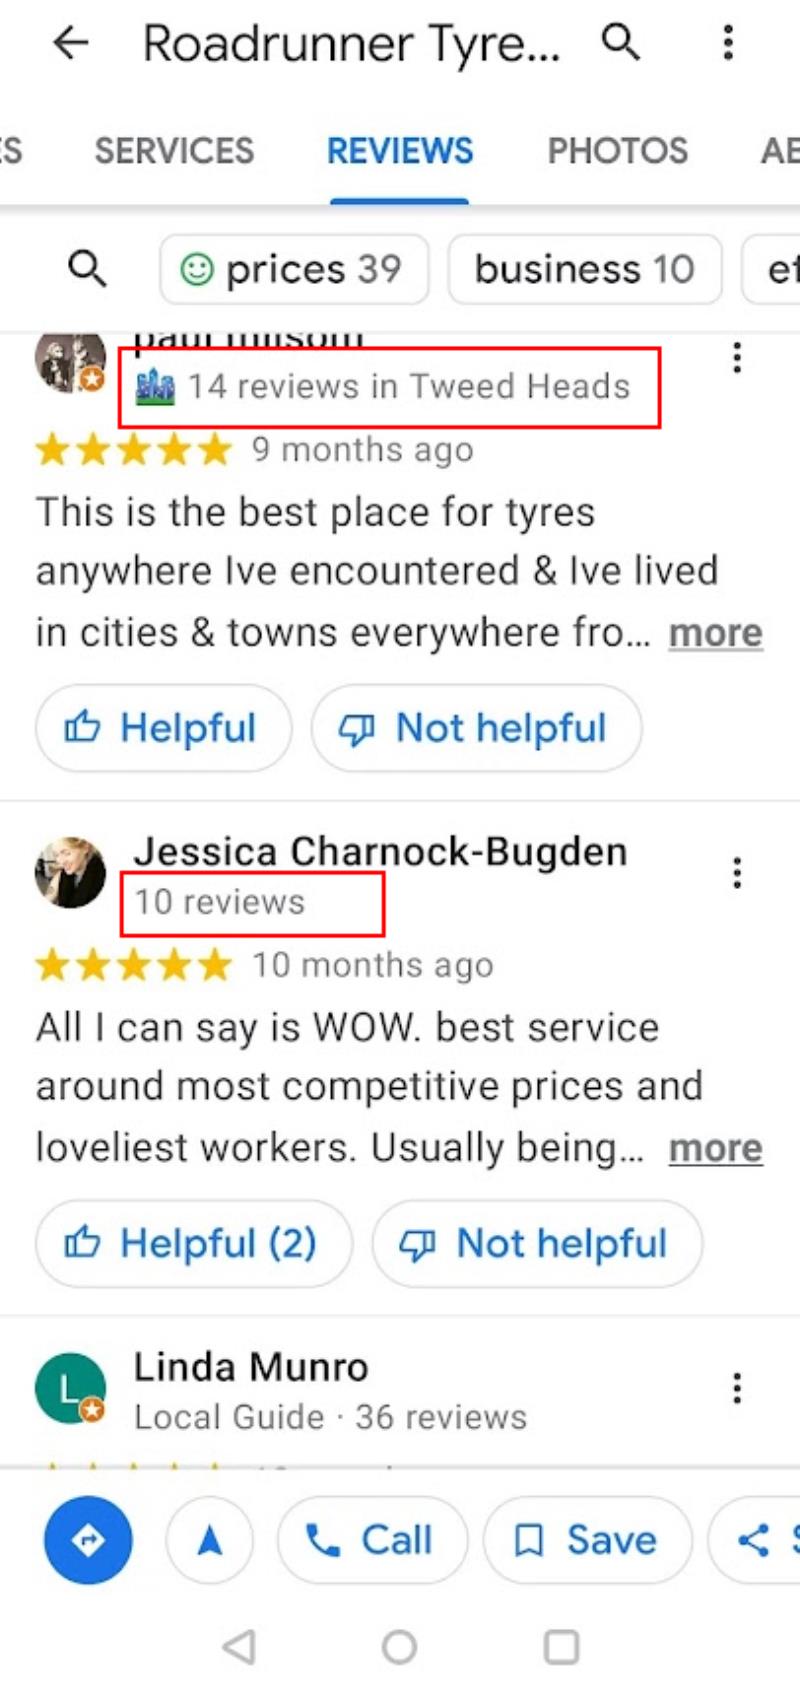 Google reviews now show local reviewer quality on review displays